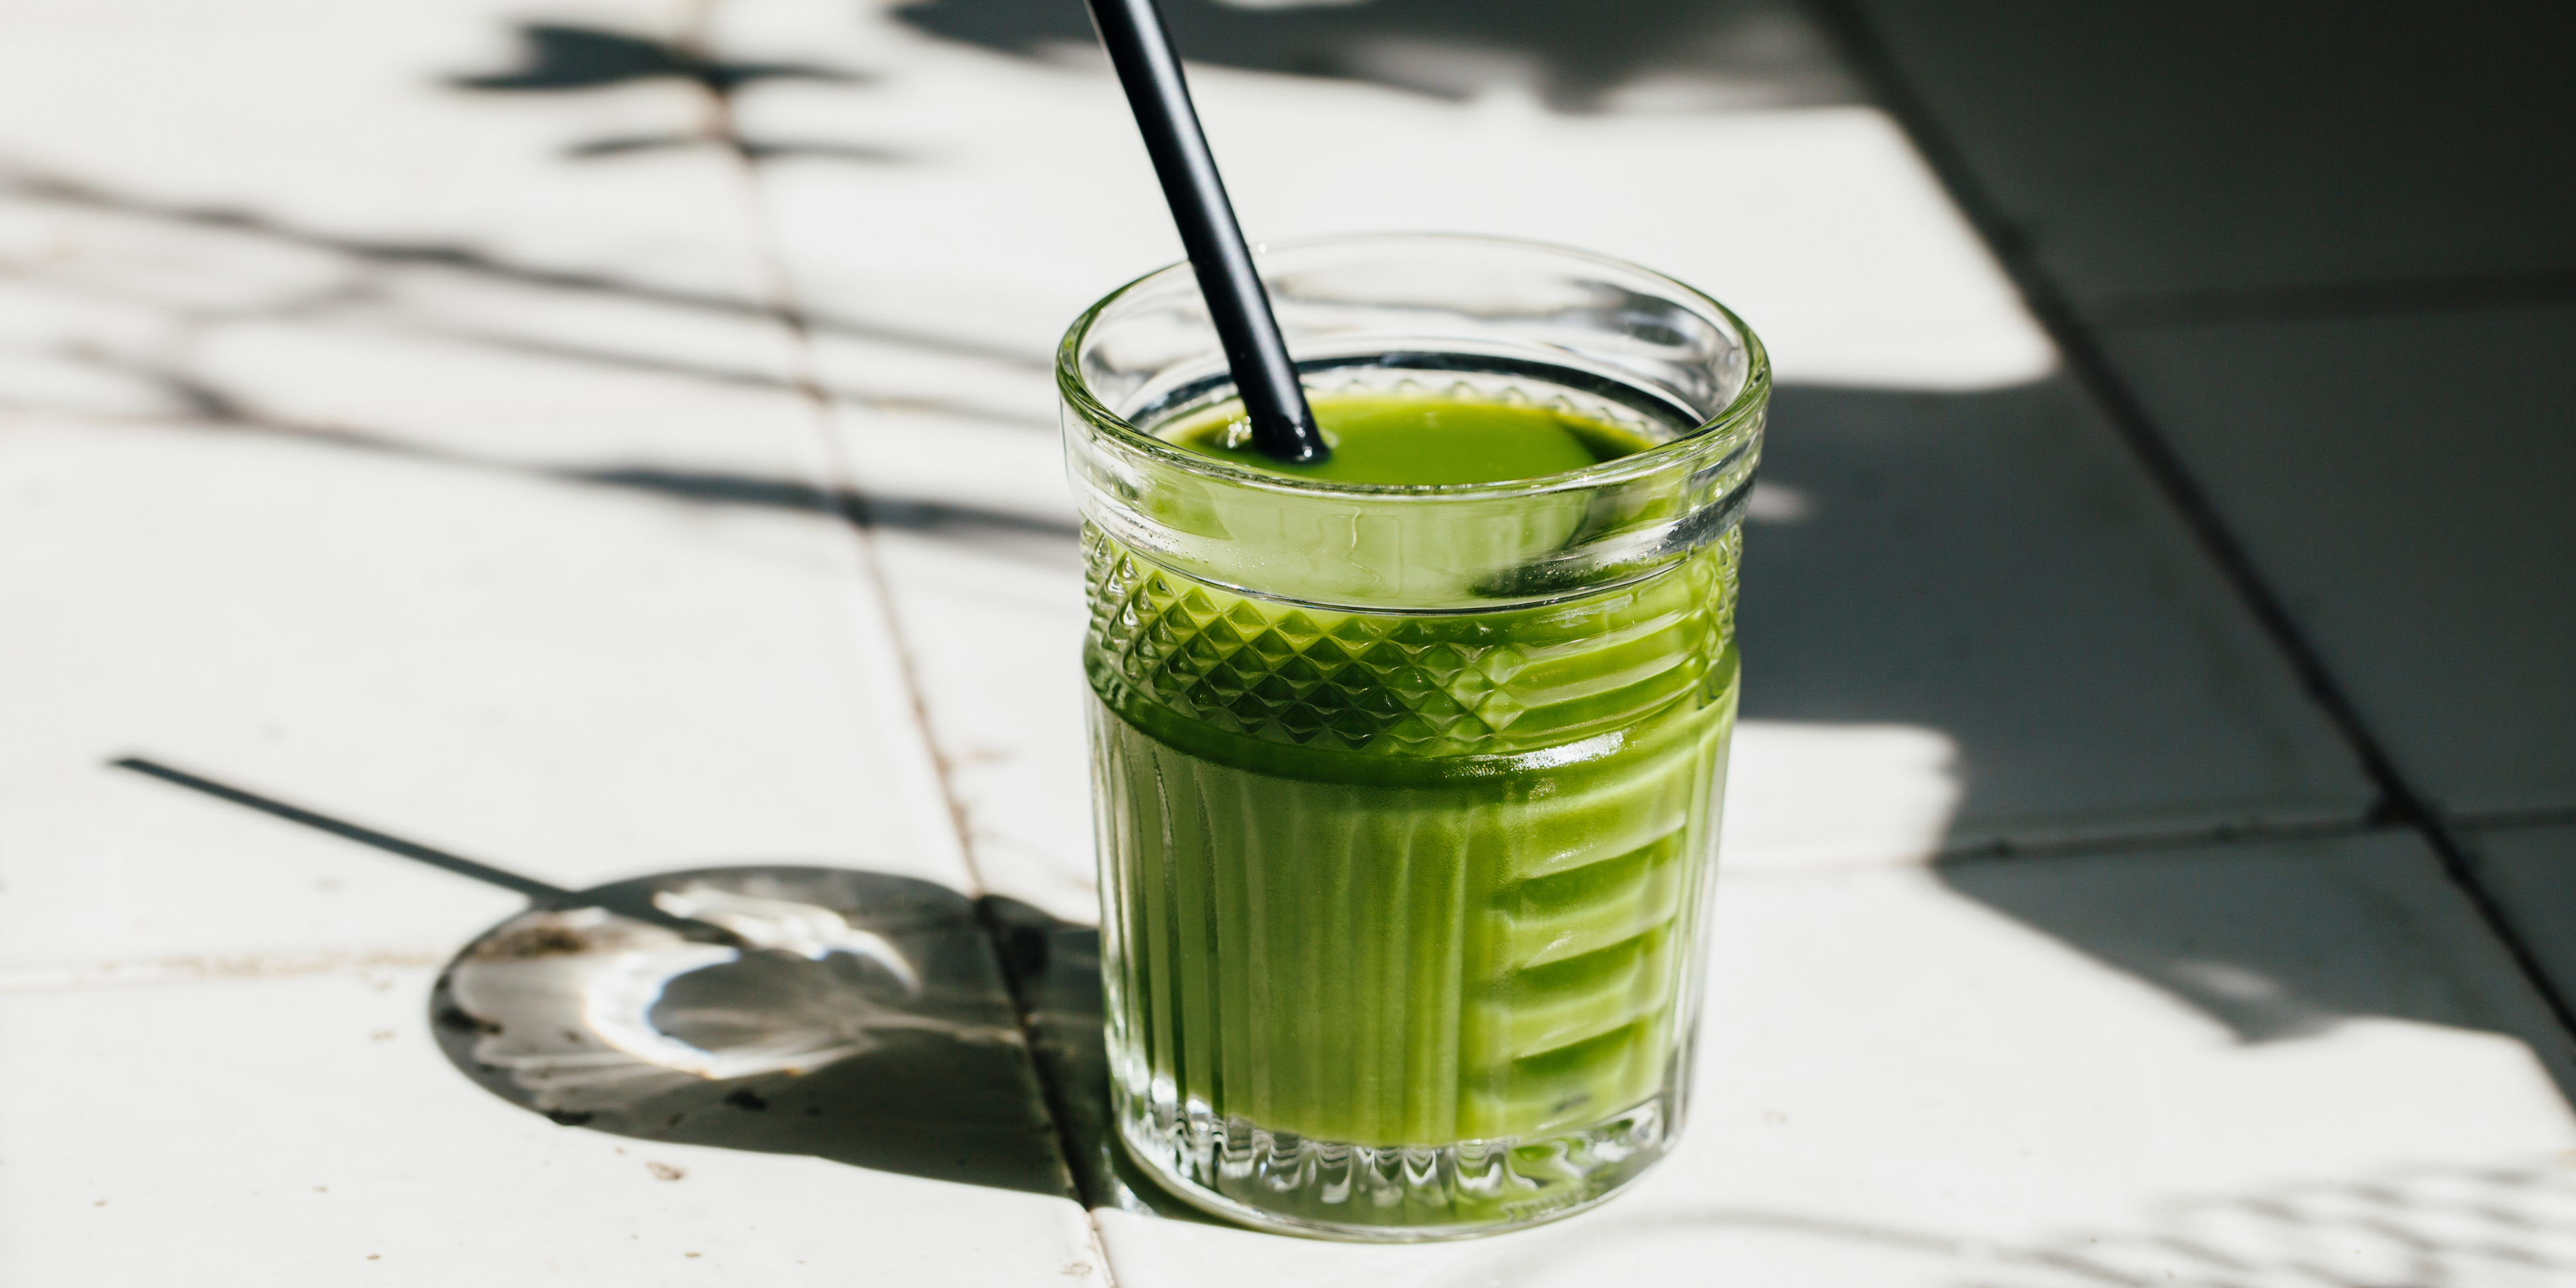 Energy Boosting Kale, Cucumber and Ginseng Juice